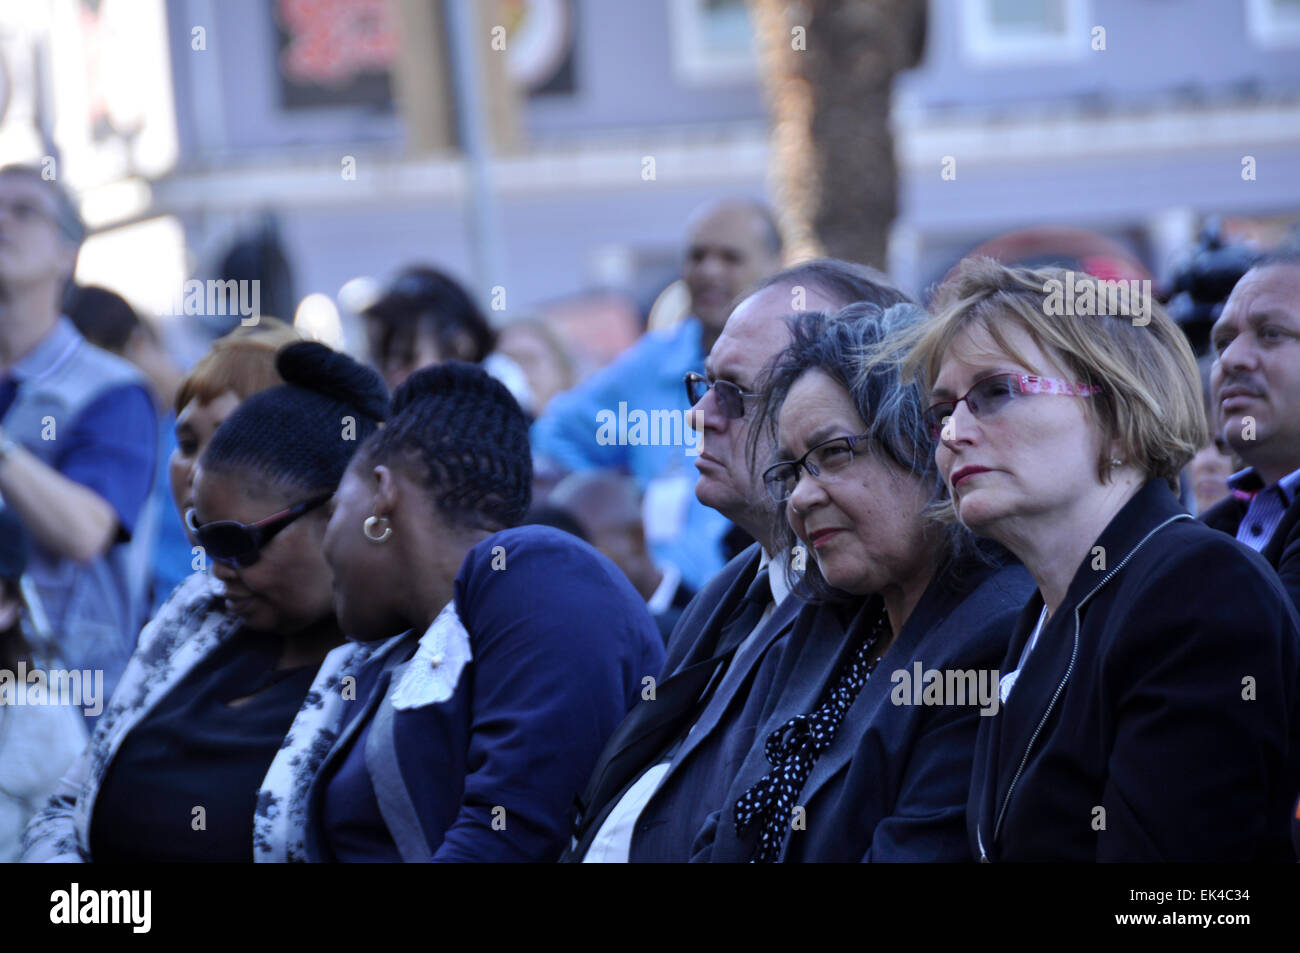 Helen zille (R)and Patricia de Lille at an interfaith service held for Mandela whose death was announced that morning,  Grand Parade, Cape Town, 16.12.2013.Helen Zille is the Premier of the Western Cape, a member of the Western Cape Provincial Parliament, leader of South Africa's opposition  political party the DA,Democratic Alliance,  former Mayor of Cape Town, former journalist, black sash member and anti-Apartheid activist.Patricia de Lille, is the present mayor of Cape Town.photo Sue Kramer Stock Photo